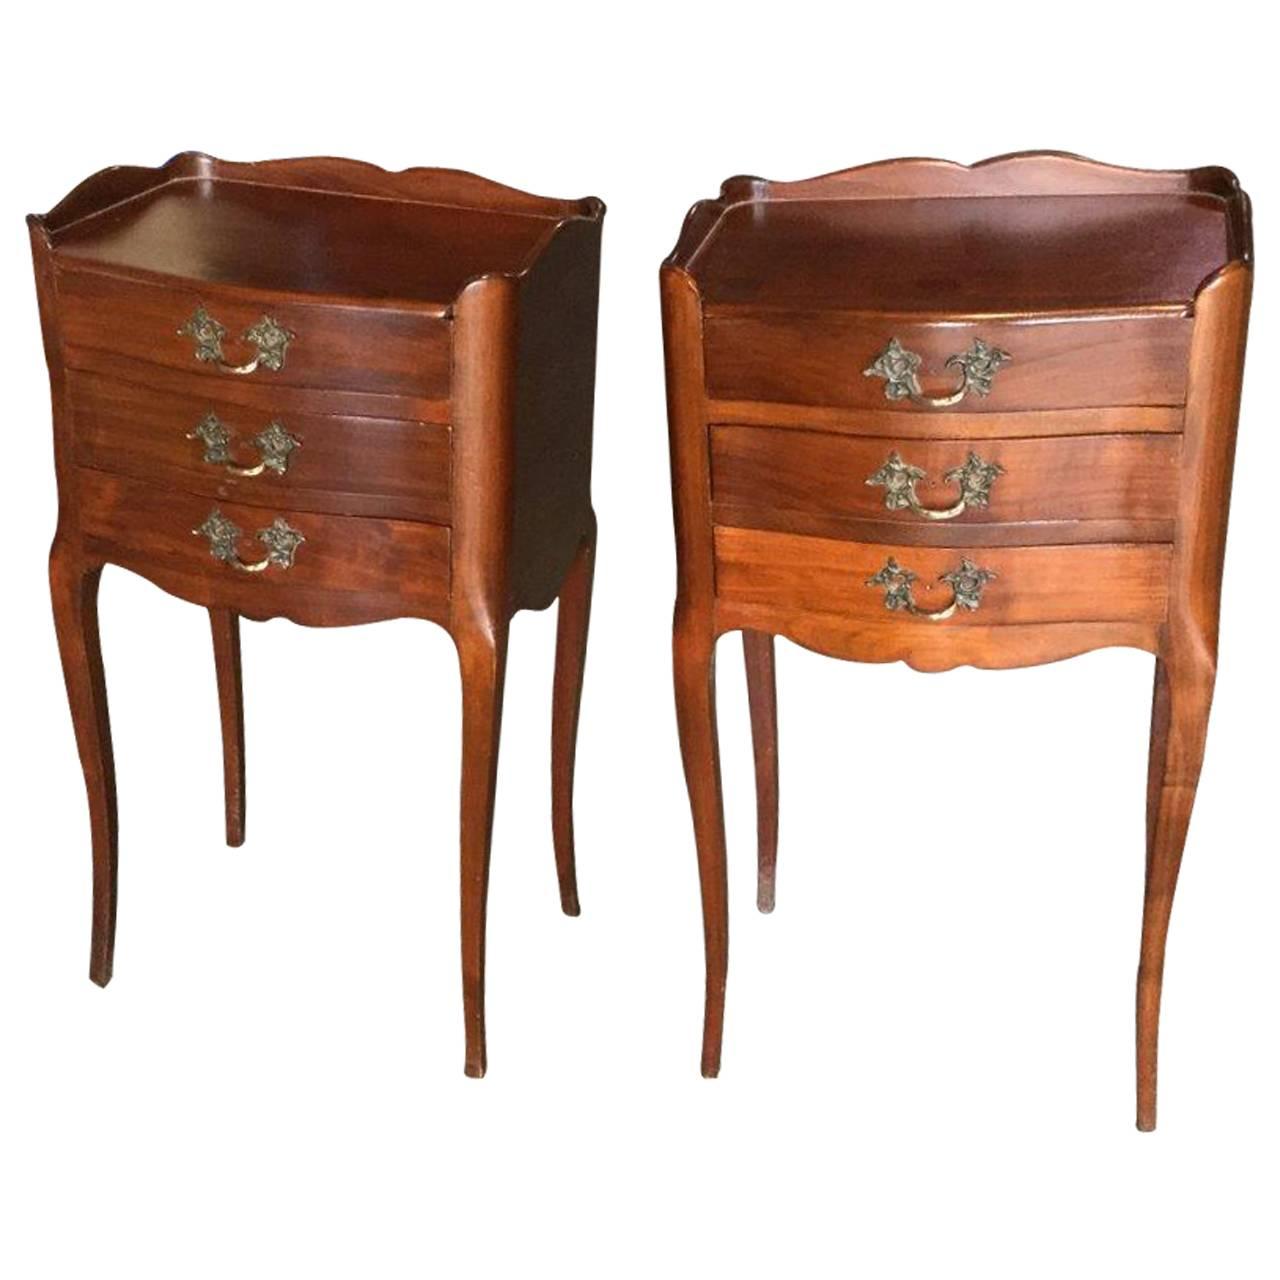 Handsome Pair of French Louis XV Style Cherry Night Tables